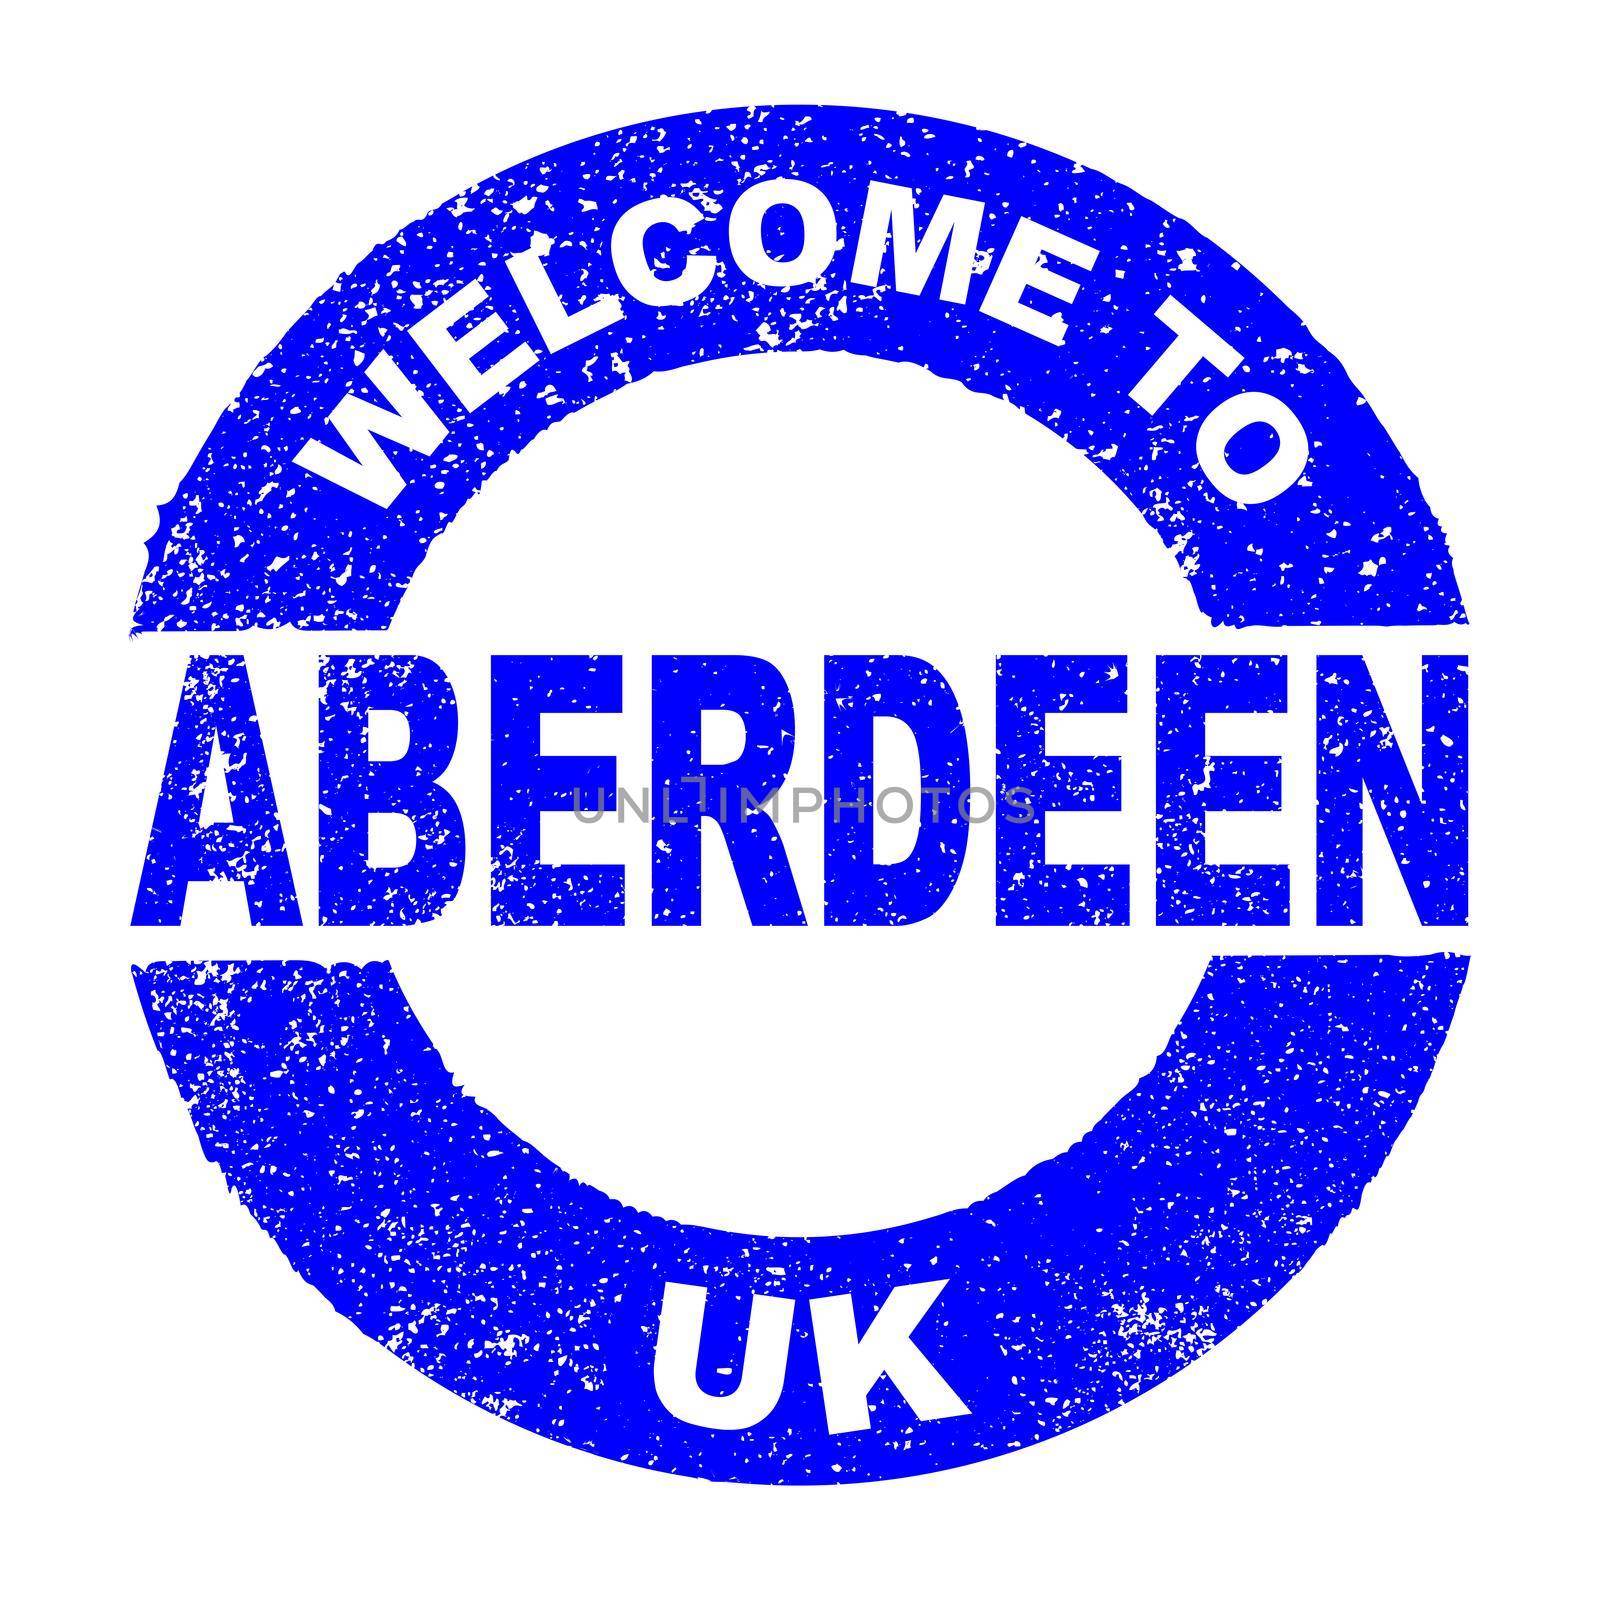 A grunge rubber ink stamp with the text Welcome To Aberdeen UK over a white background